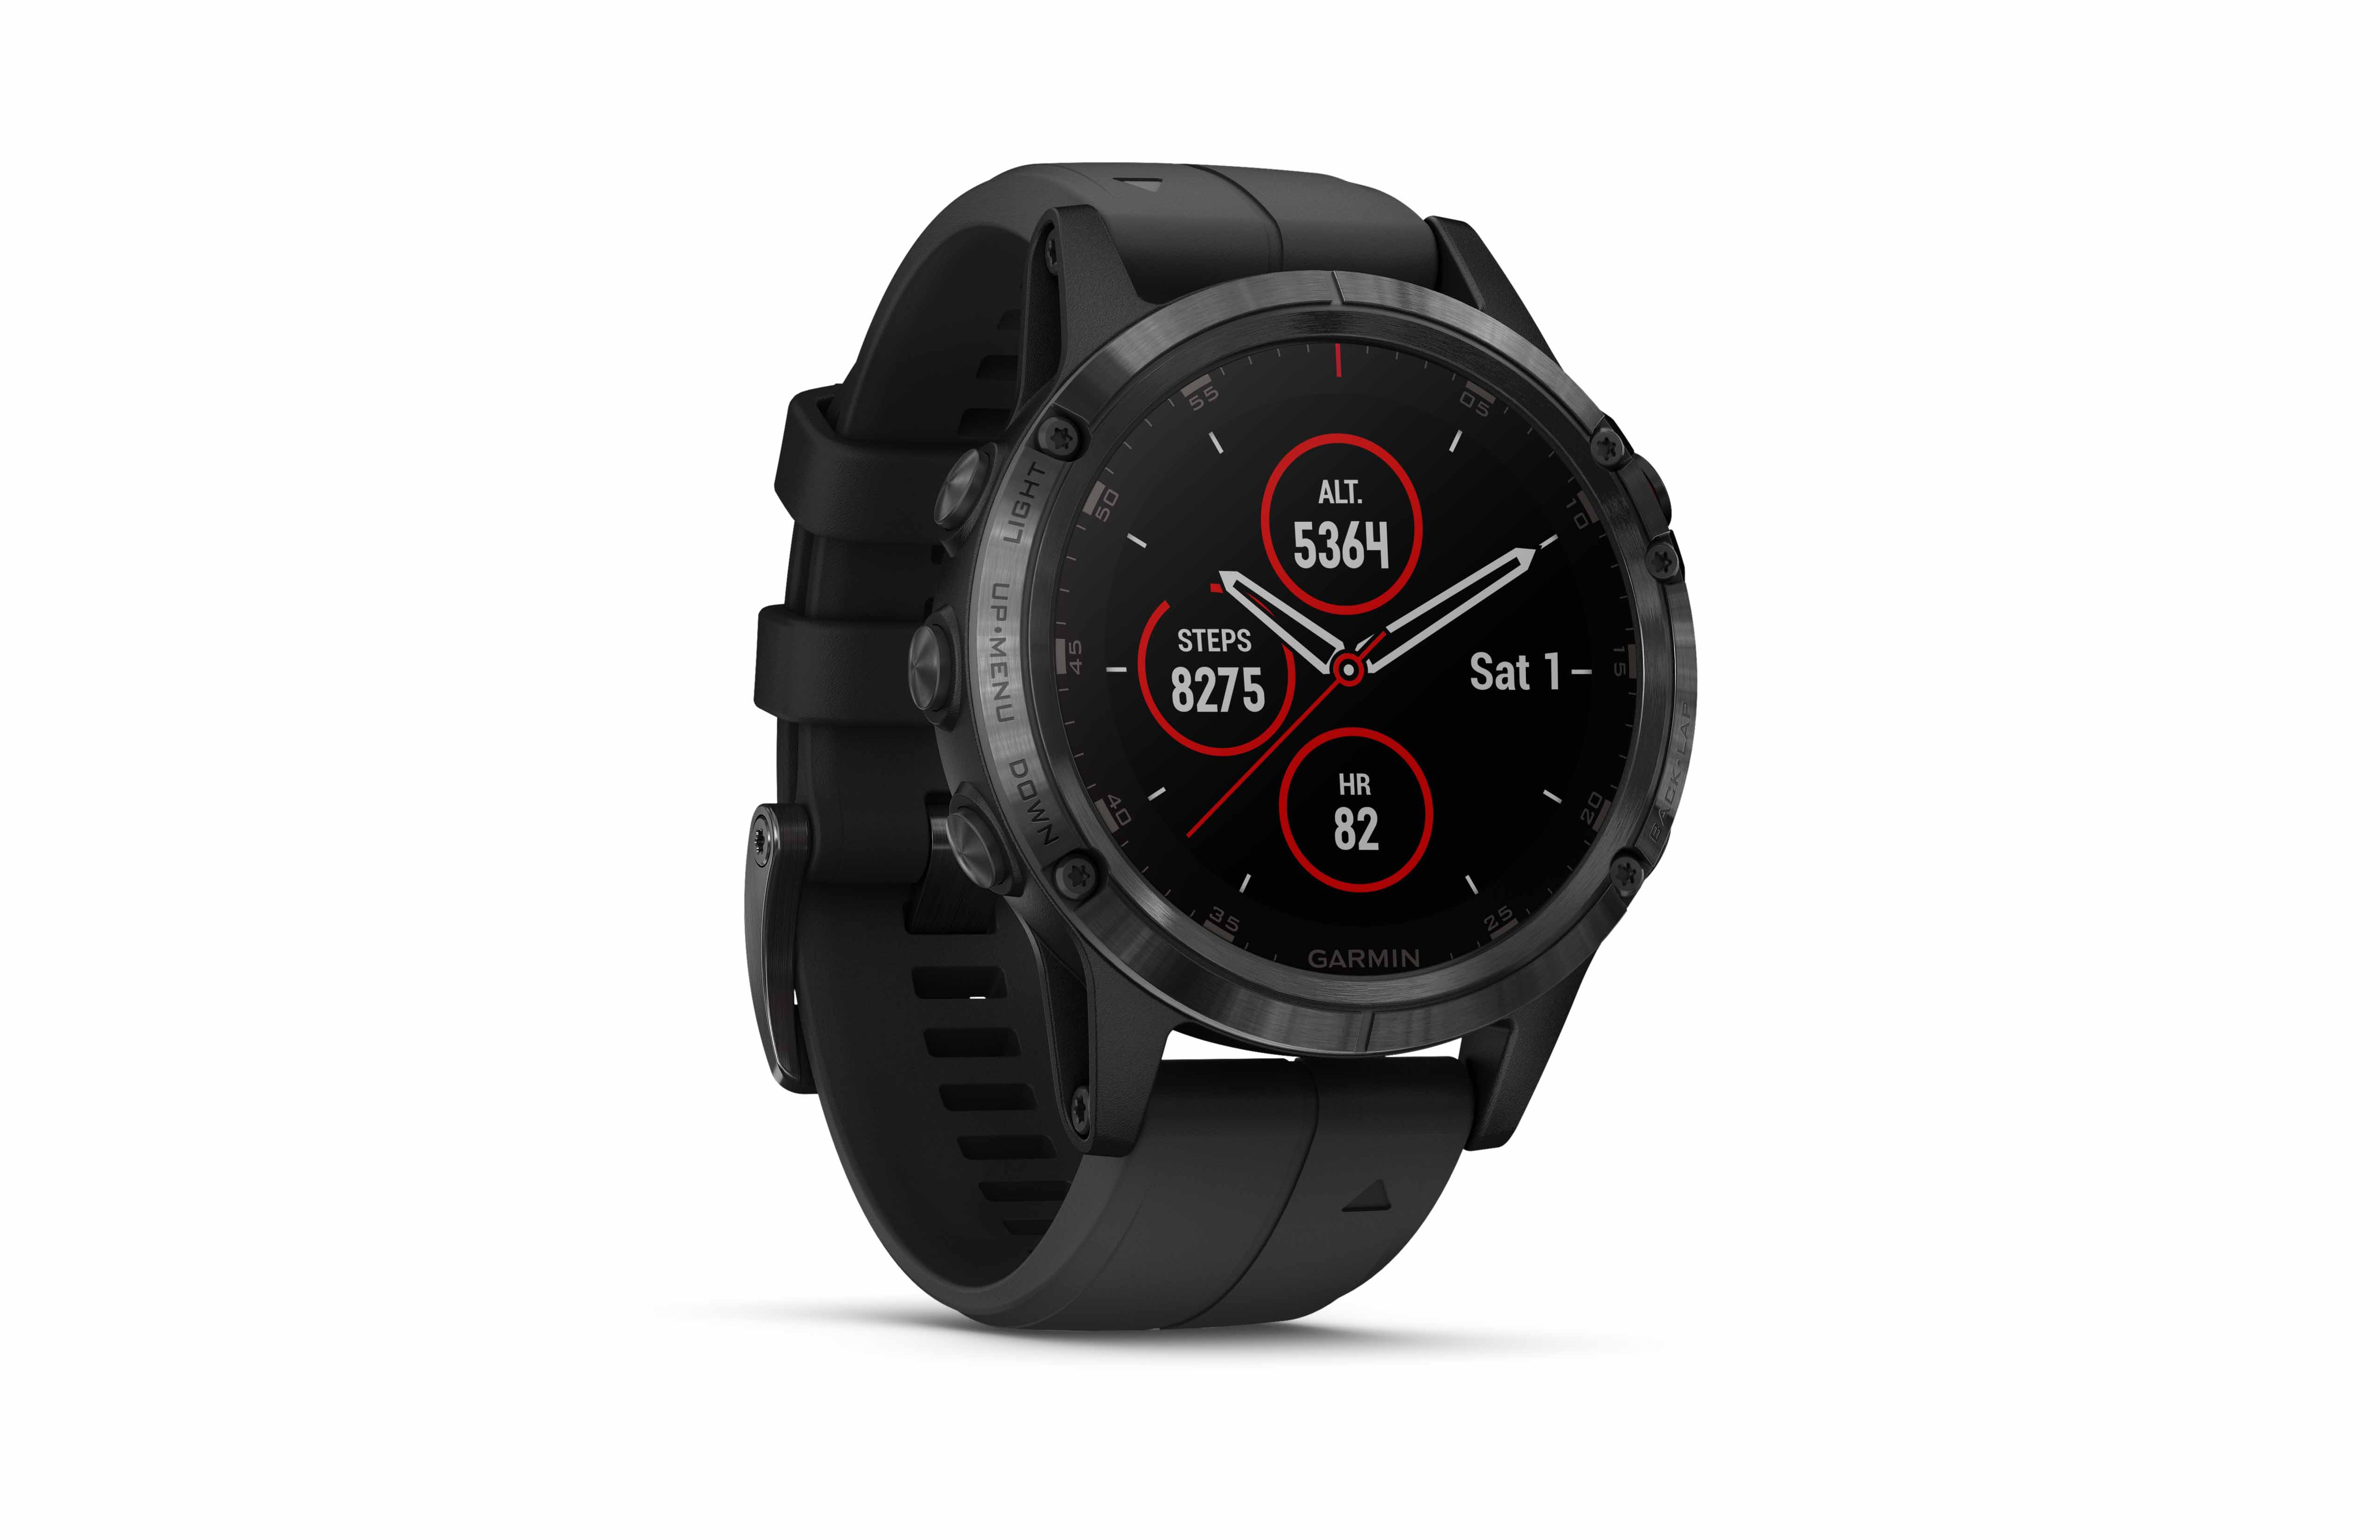 Garmin sets new heights for the all new Fenix 5 Plus Series | Press Release